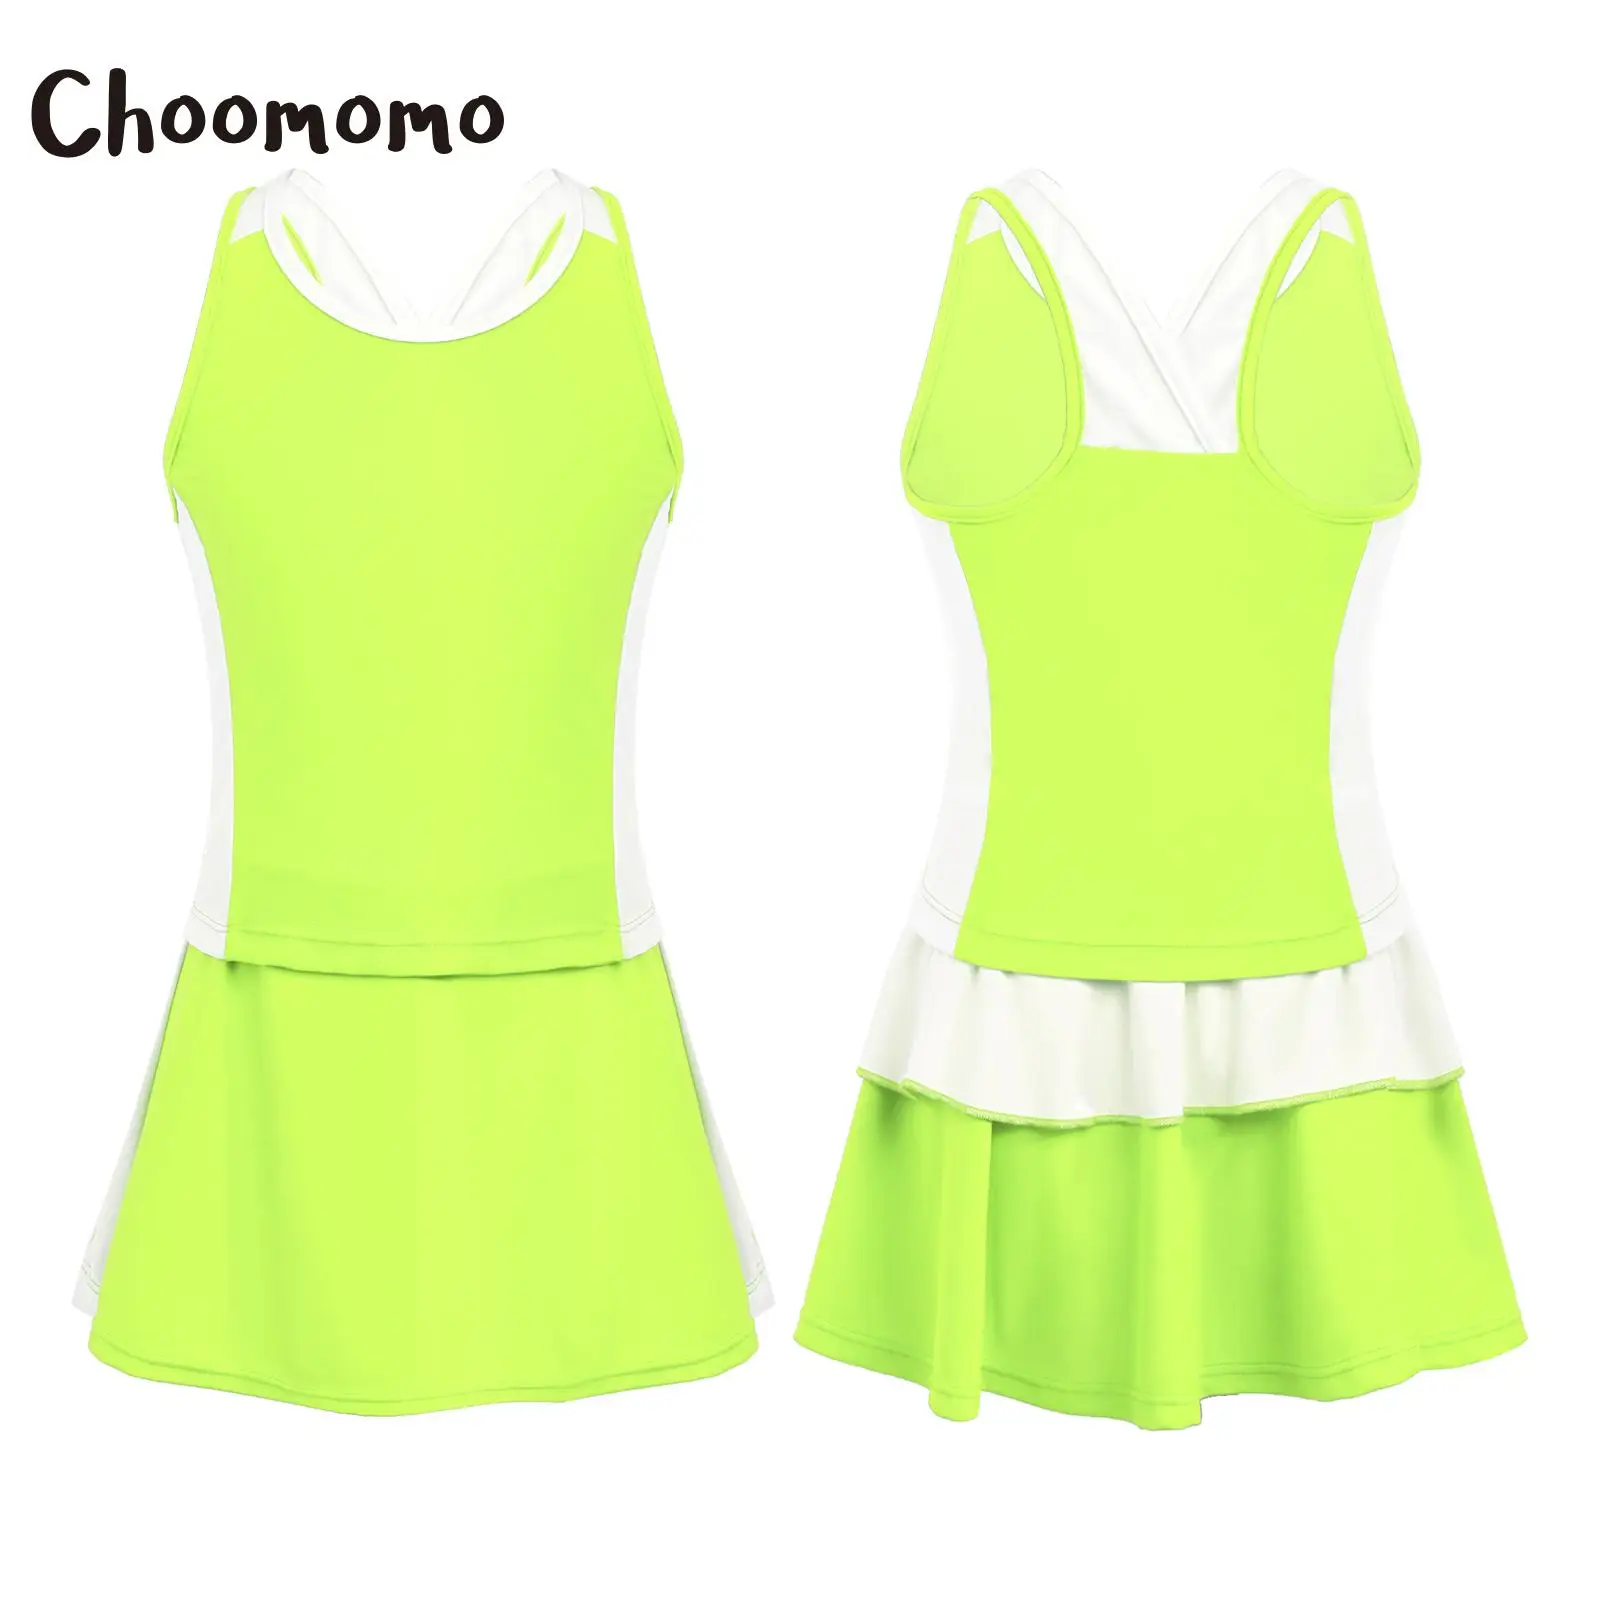 

Choomomo Kids Girls Sleeveless Colorblock Fluorescent 2Pc Sport Vest Tops and Skirt Sportswear Set with Attached Shorts Workouts